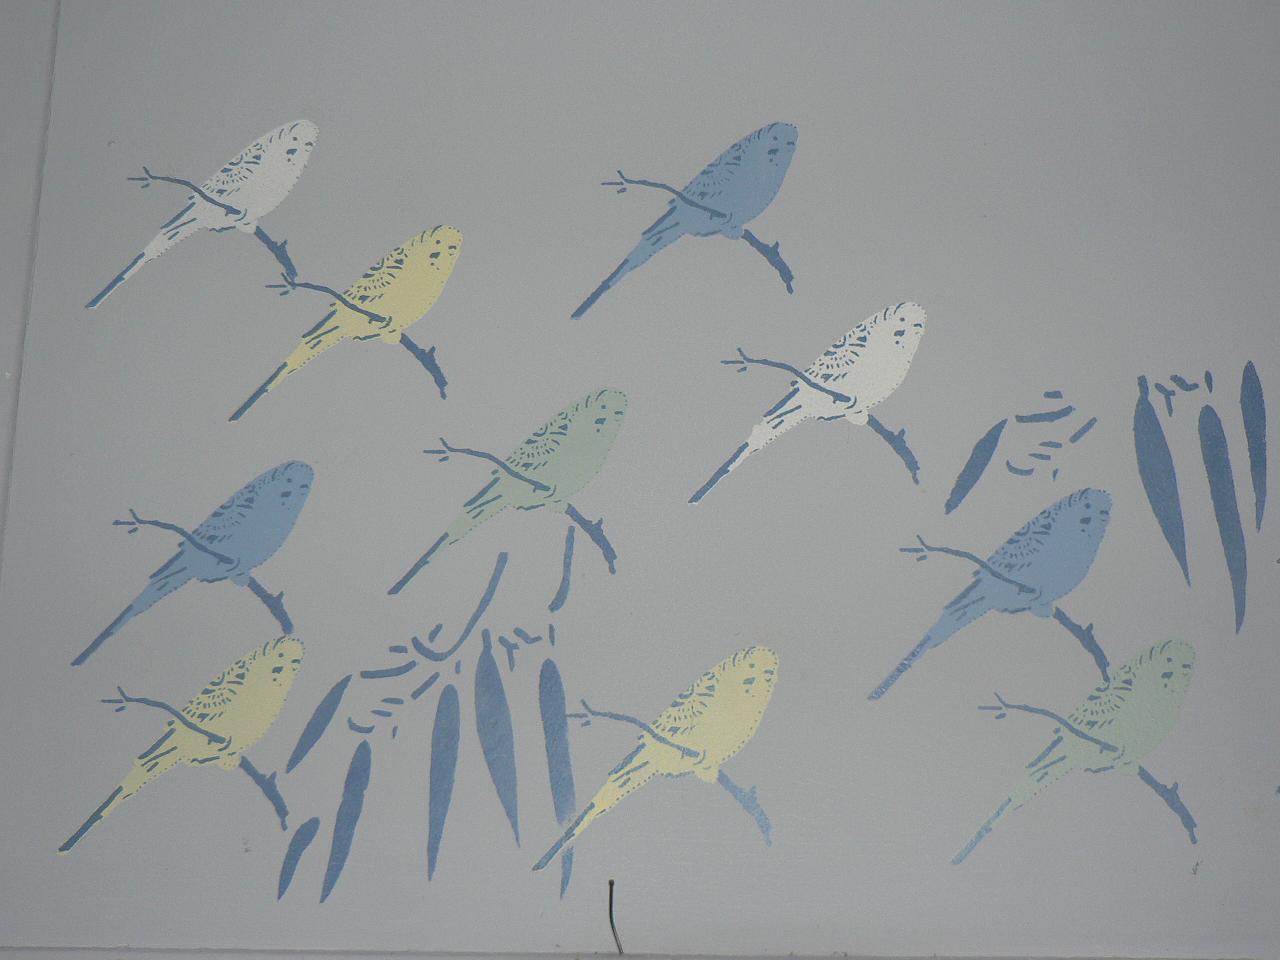 Budgies on the wall